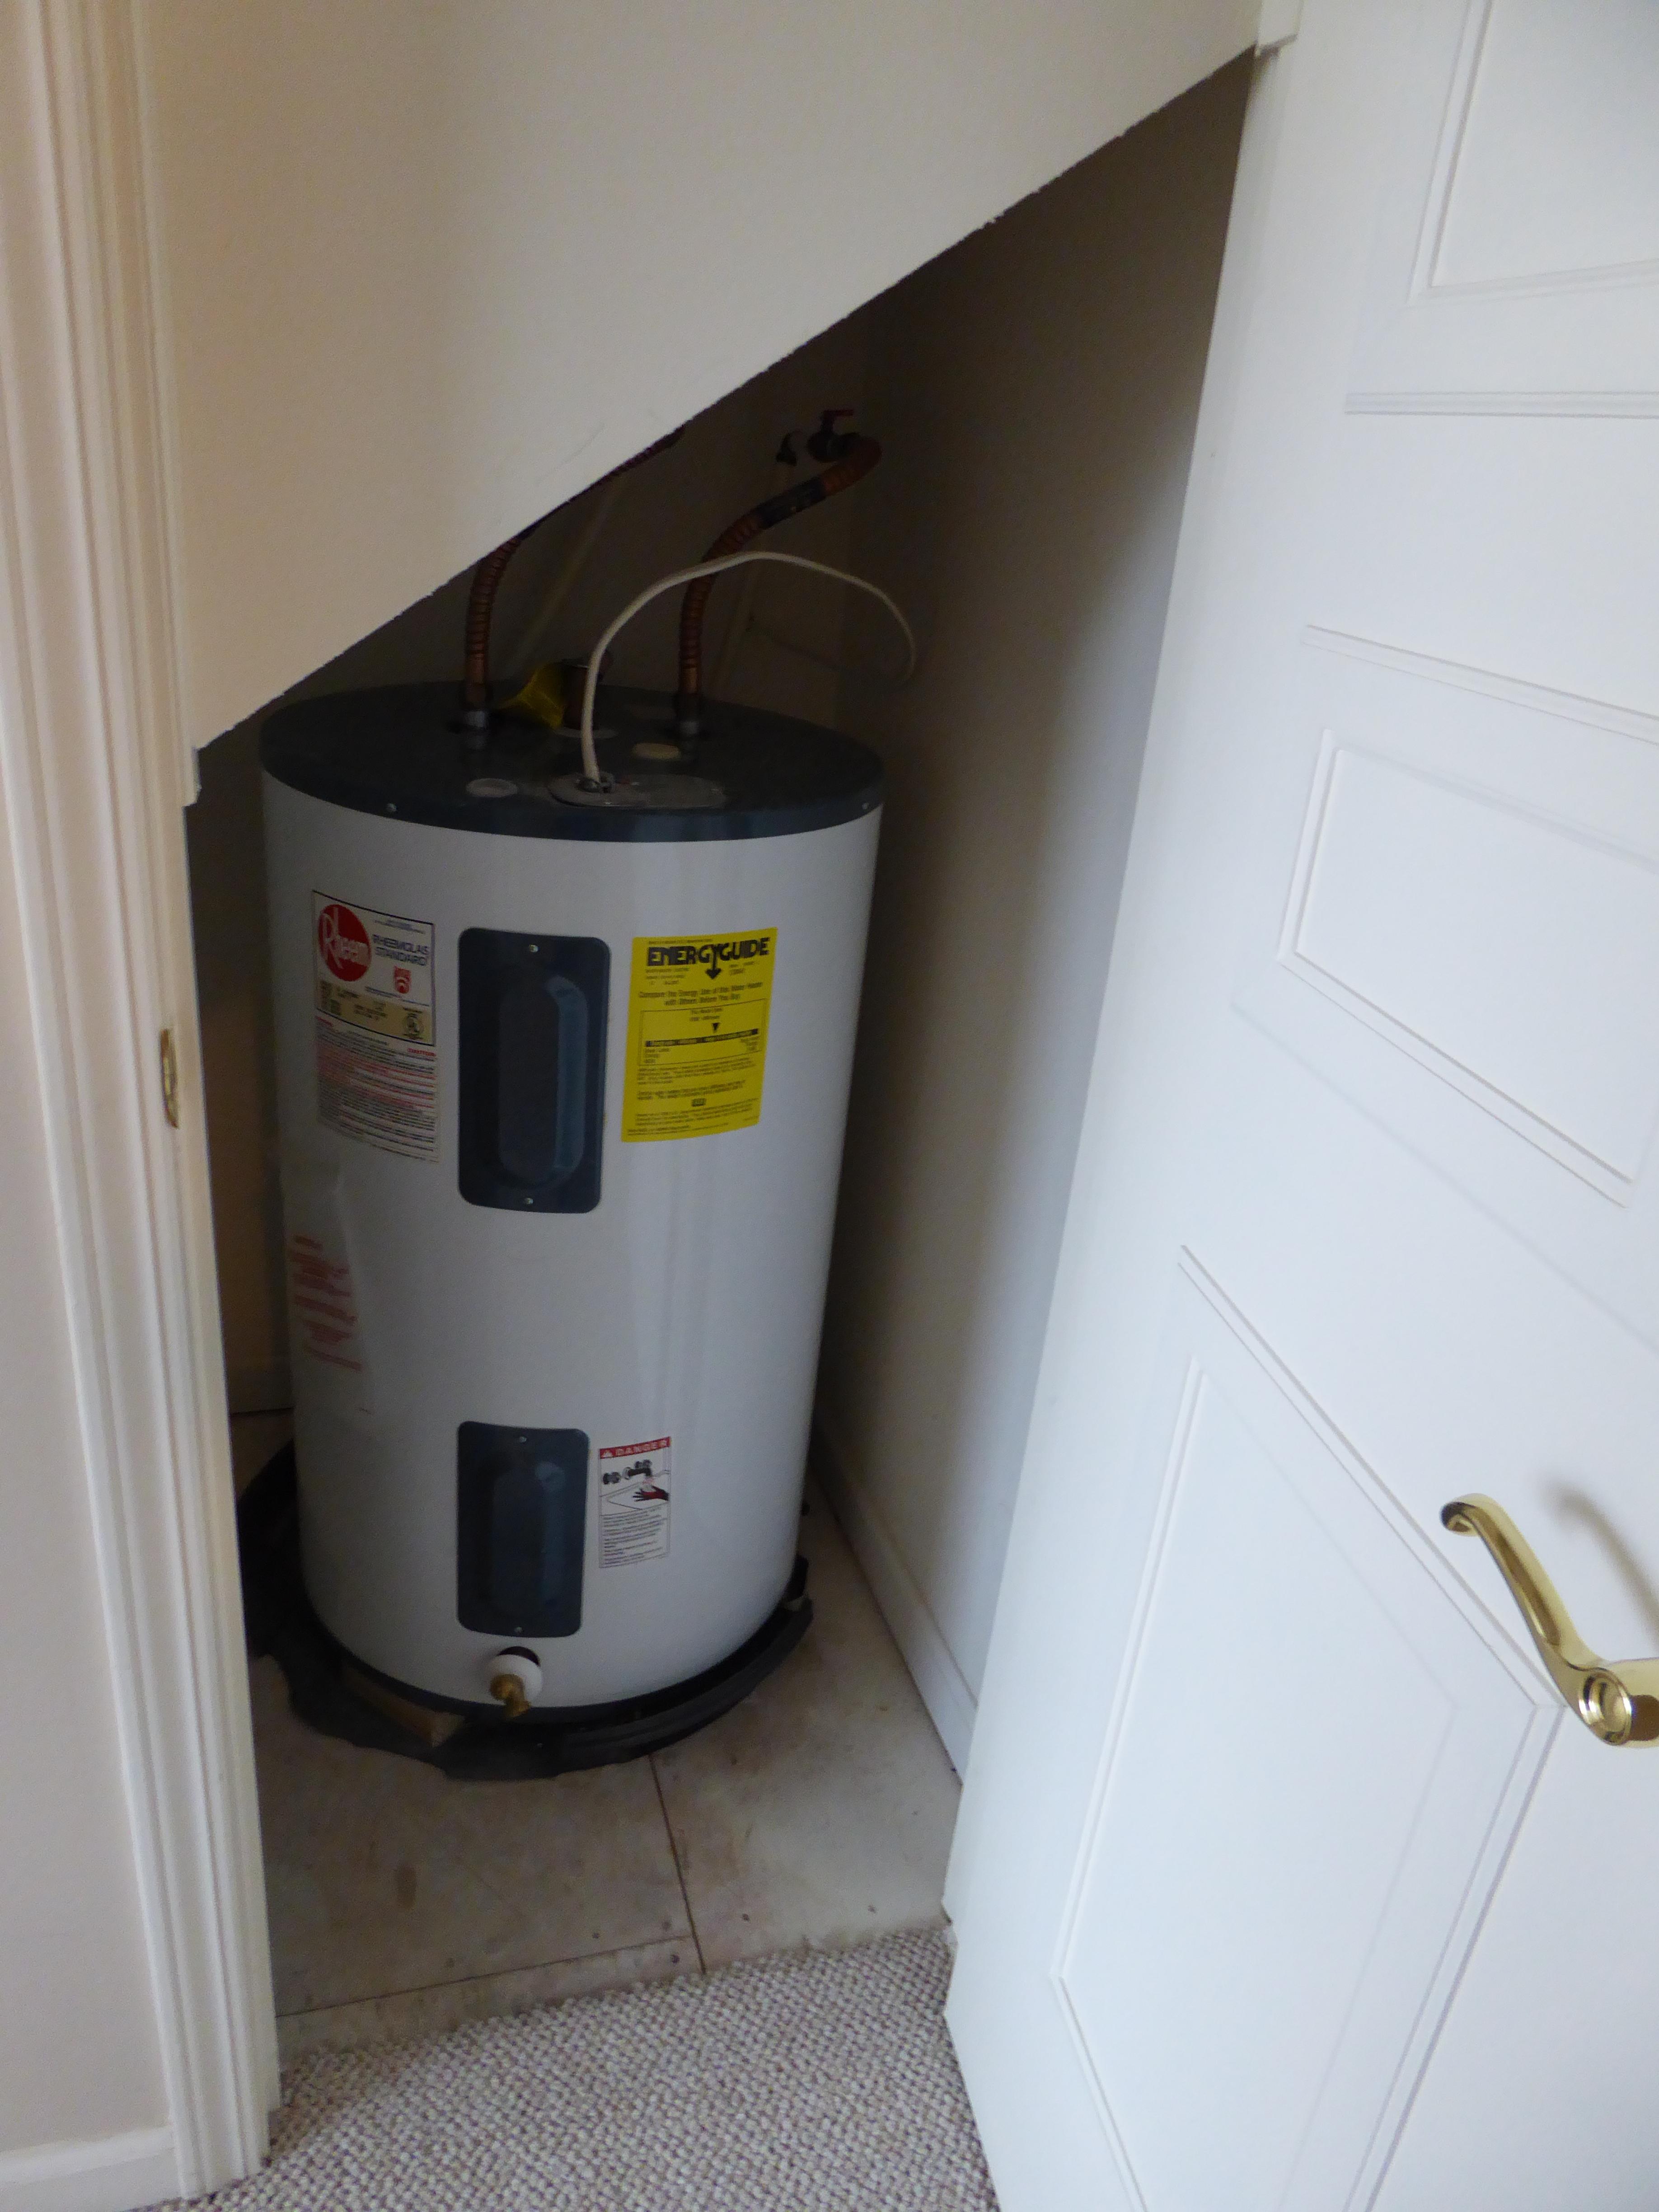 Steps to Take If Your Water Heater Breaks - Water Damage Cleanup Tips